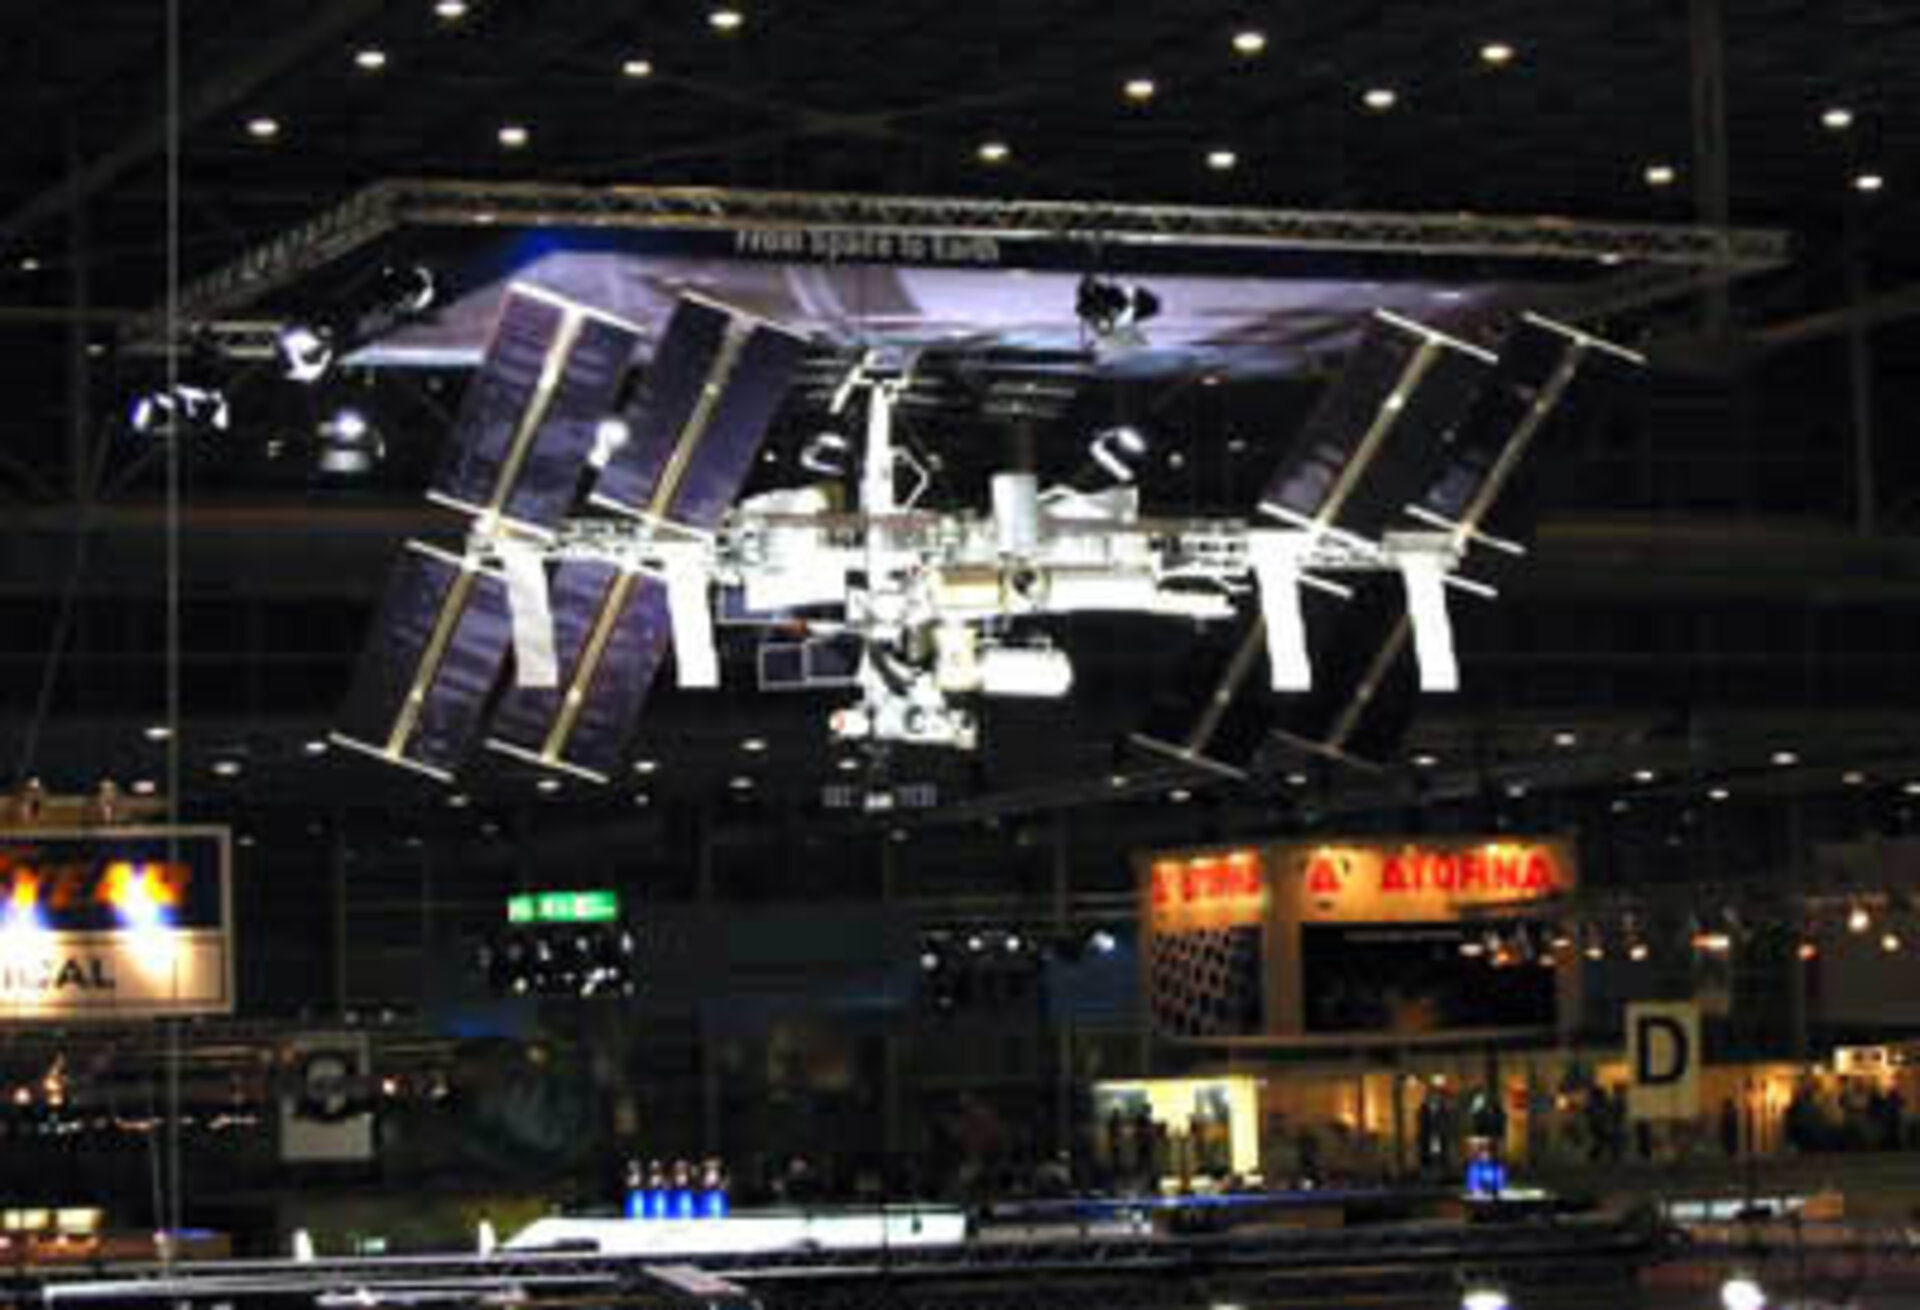 ISS model at K2001